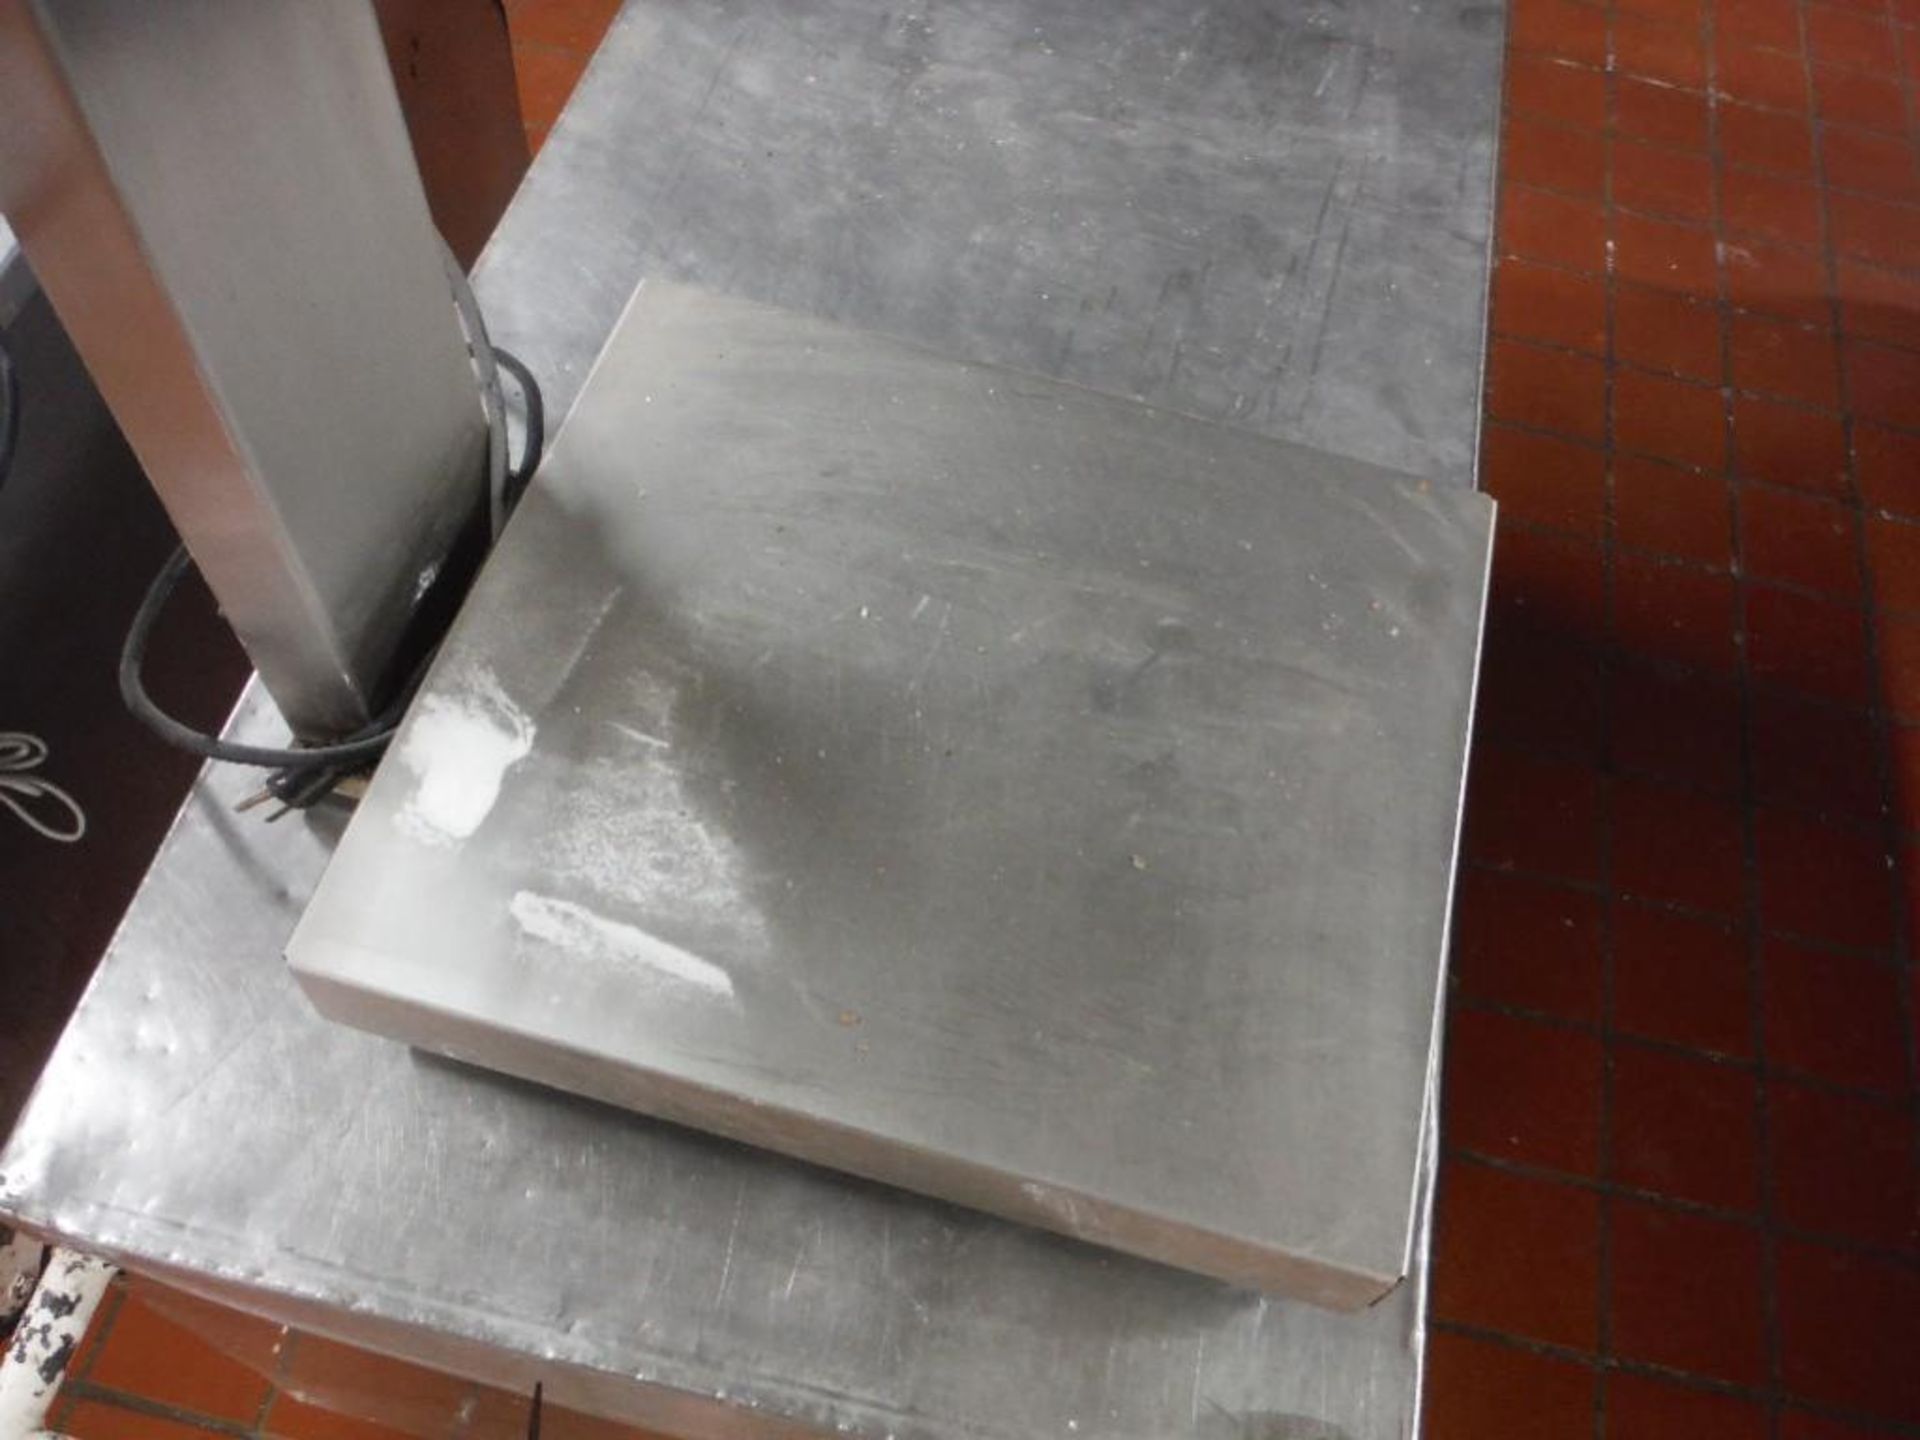 Fairbanks scale, 100 x 0.02 lb, 18 in. x 16 in, with rolling SS table - Rigging Fee: $75 - Image 6 of 6